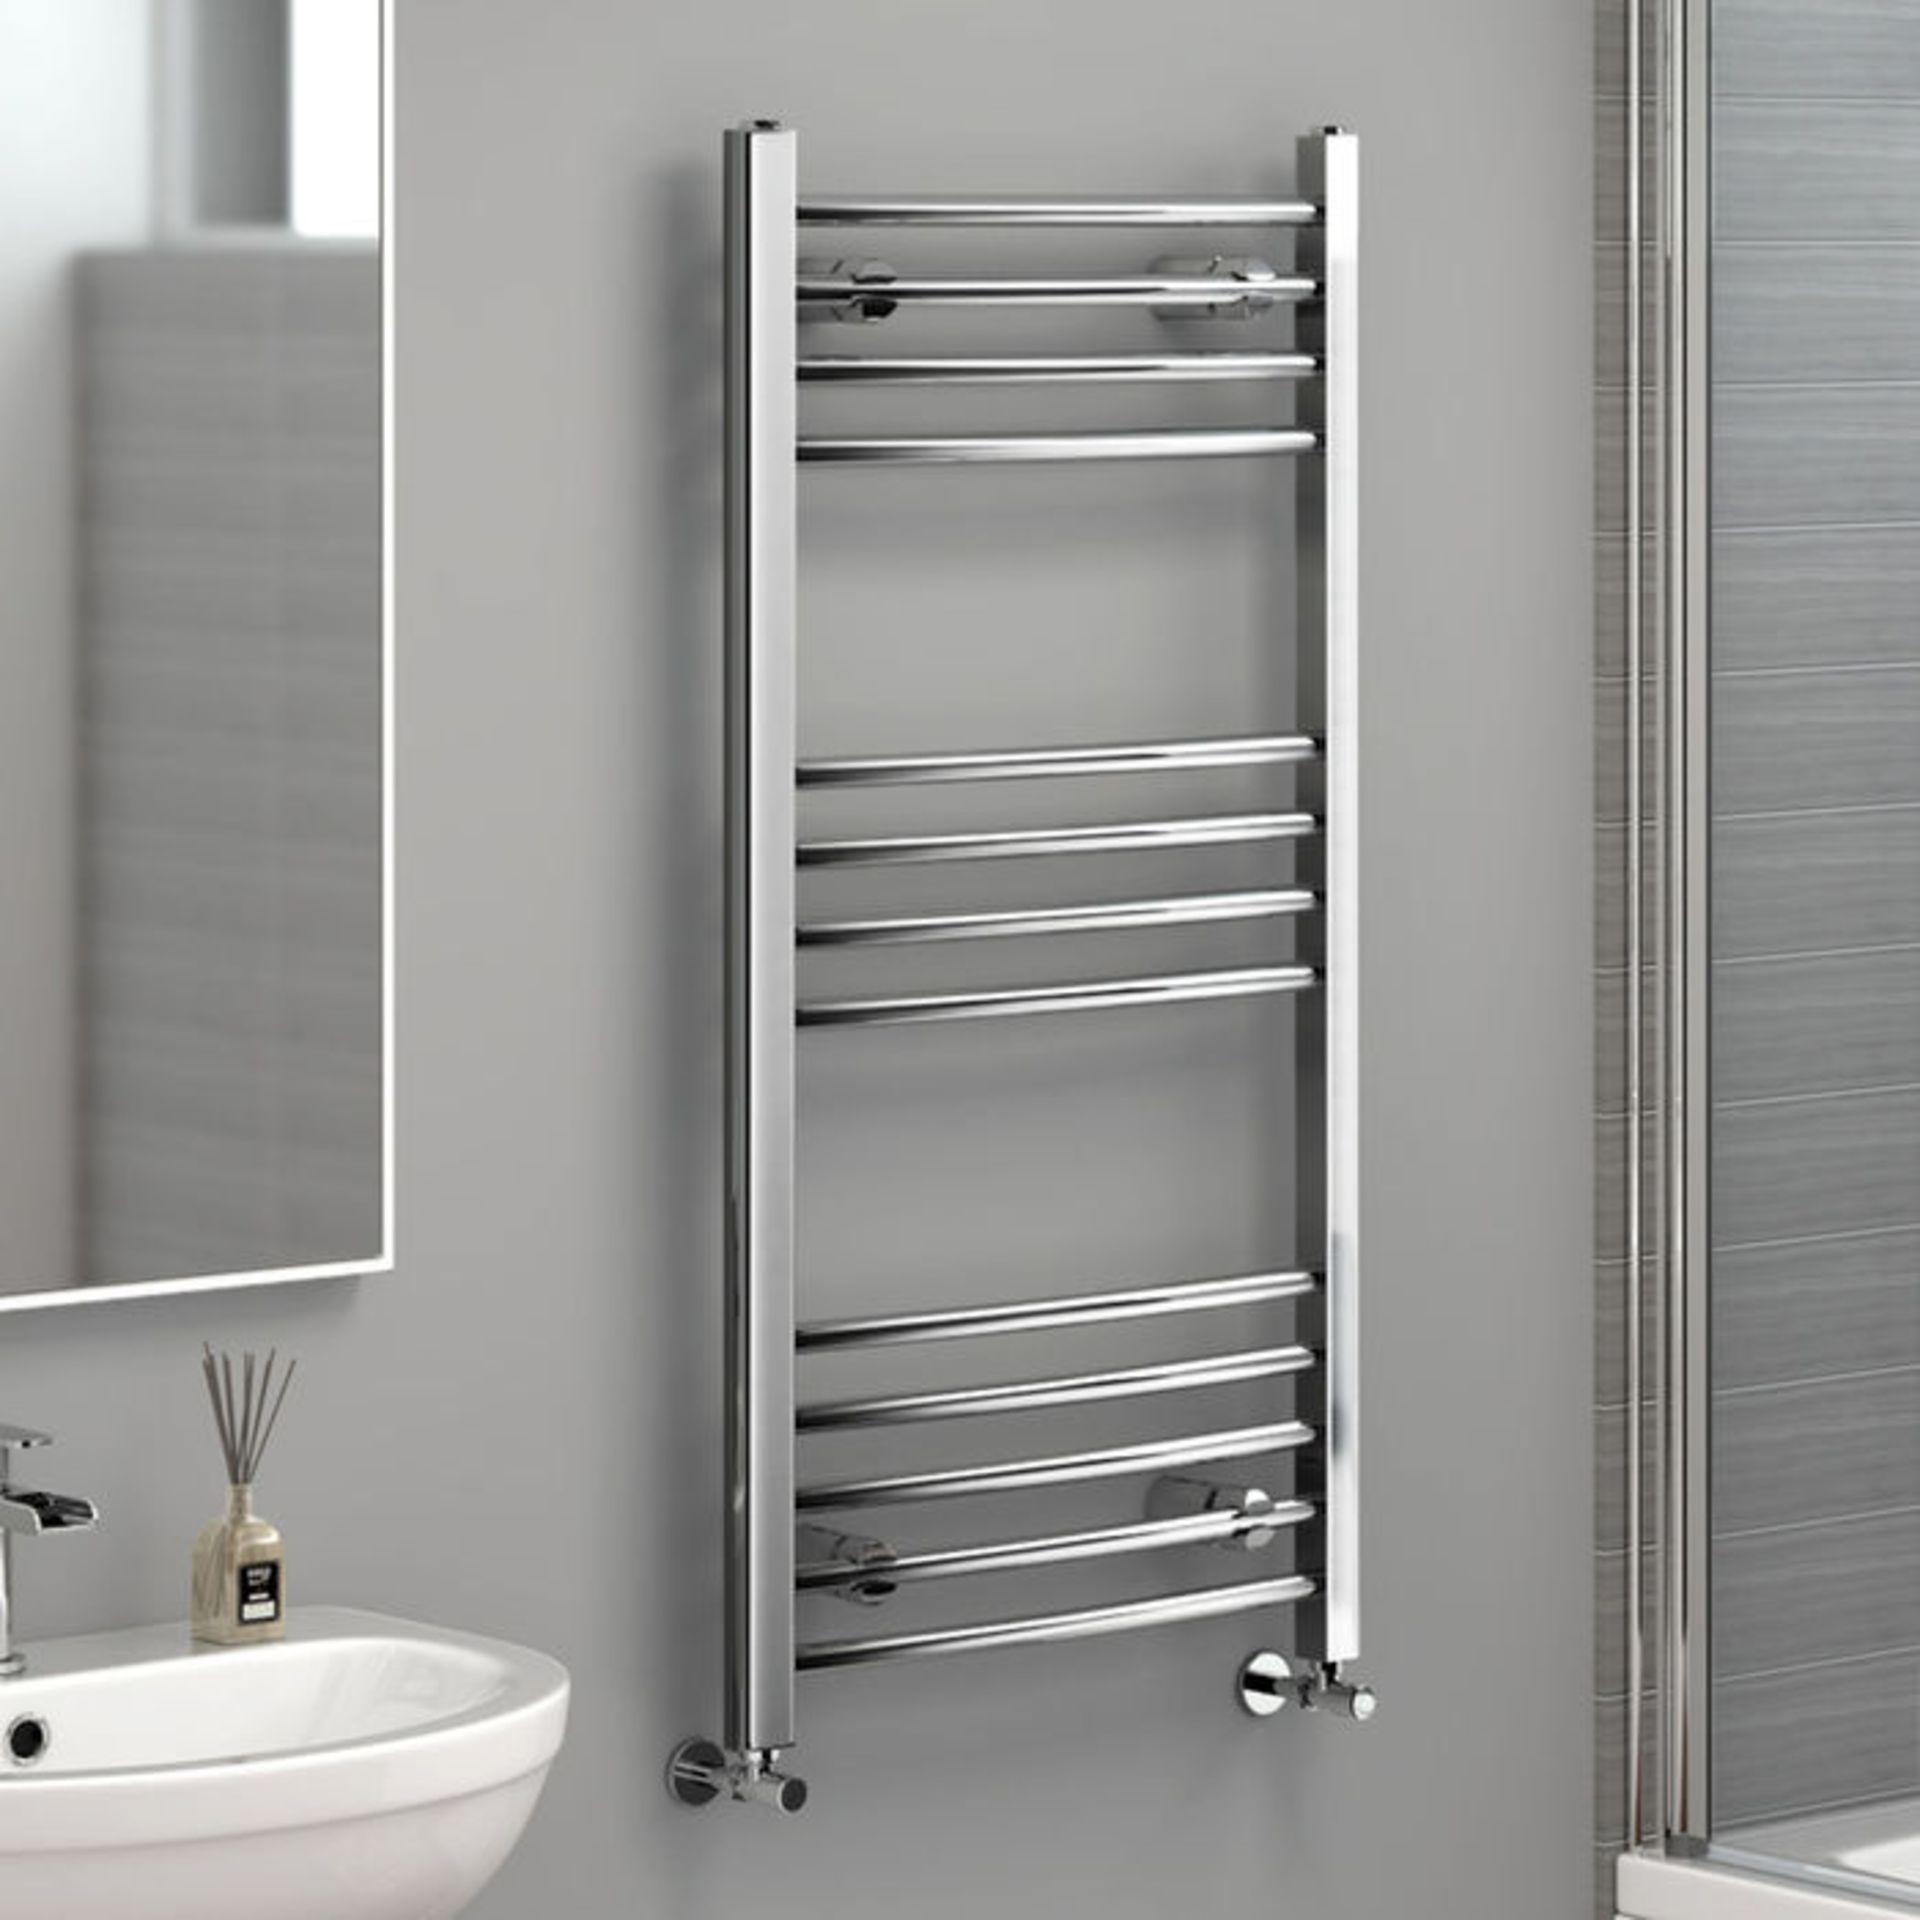 (Z168) 1000x500mm - 20mm Tubes - Chrome Curved Rail Ladder Towel Radiator. Low carbon steel chrome - Image 2 of 5